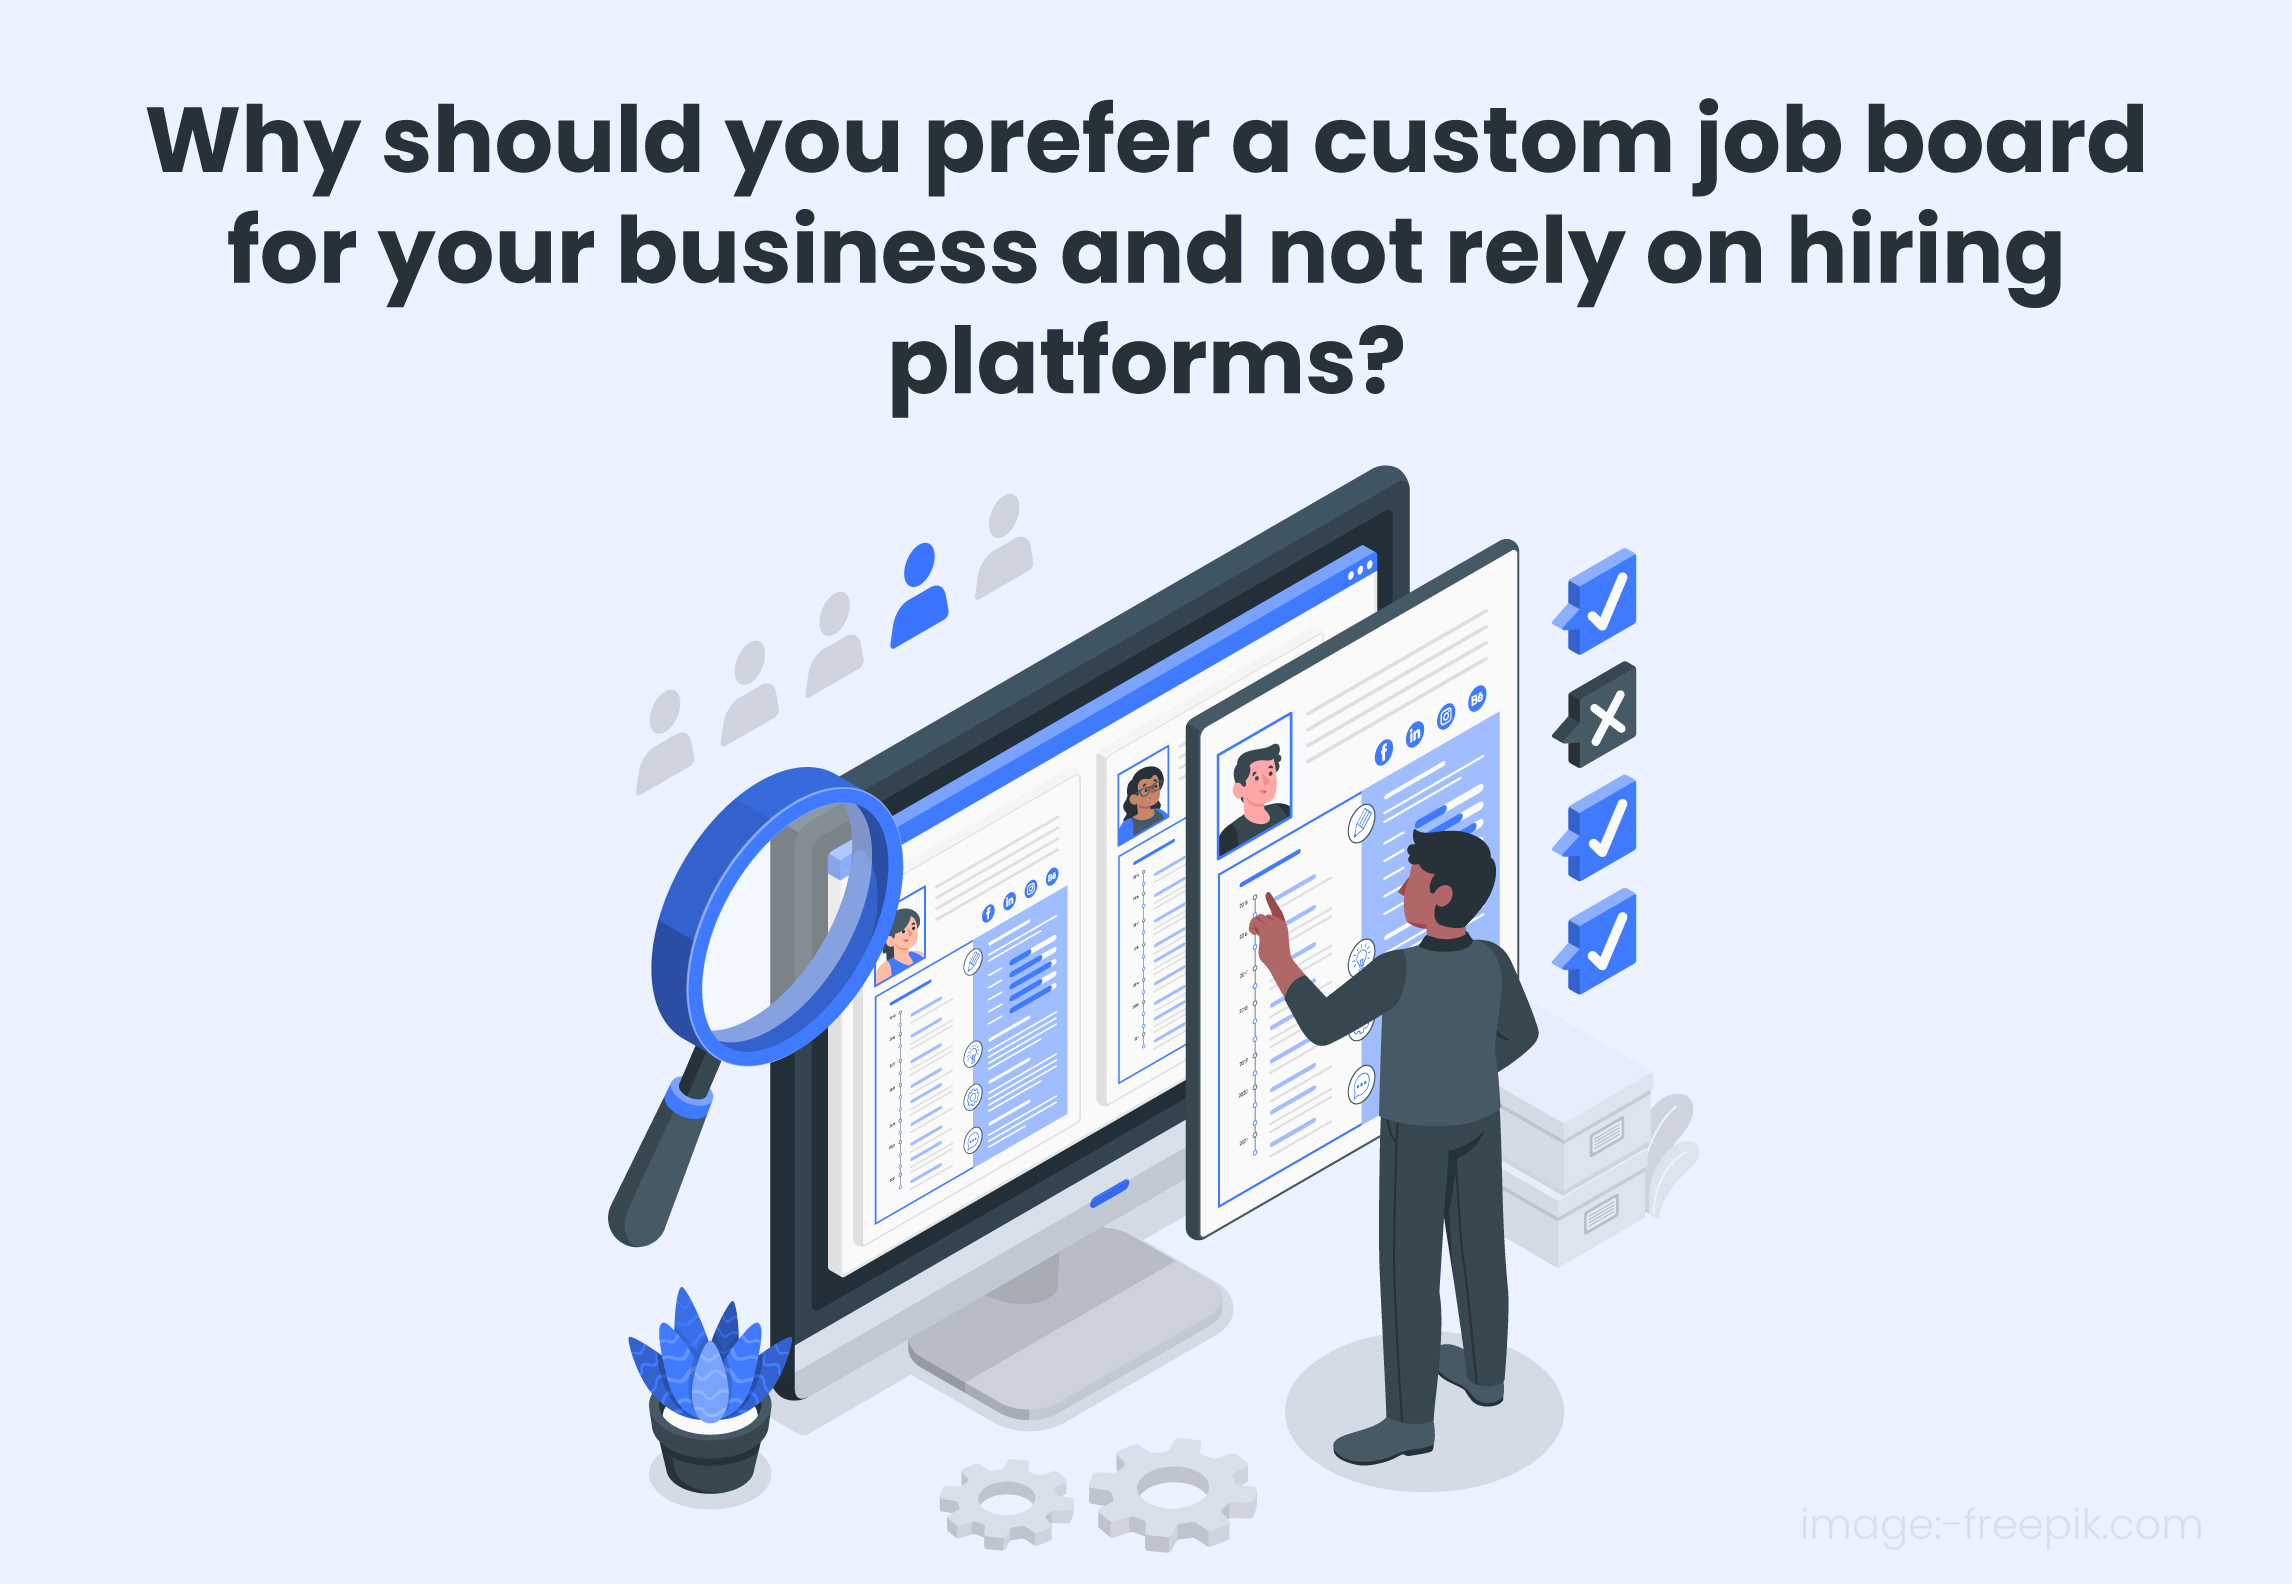 Advantages of Using a Custom Job Board Over Hiring Platforms for Business Hiring Needs